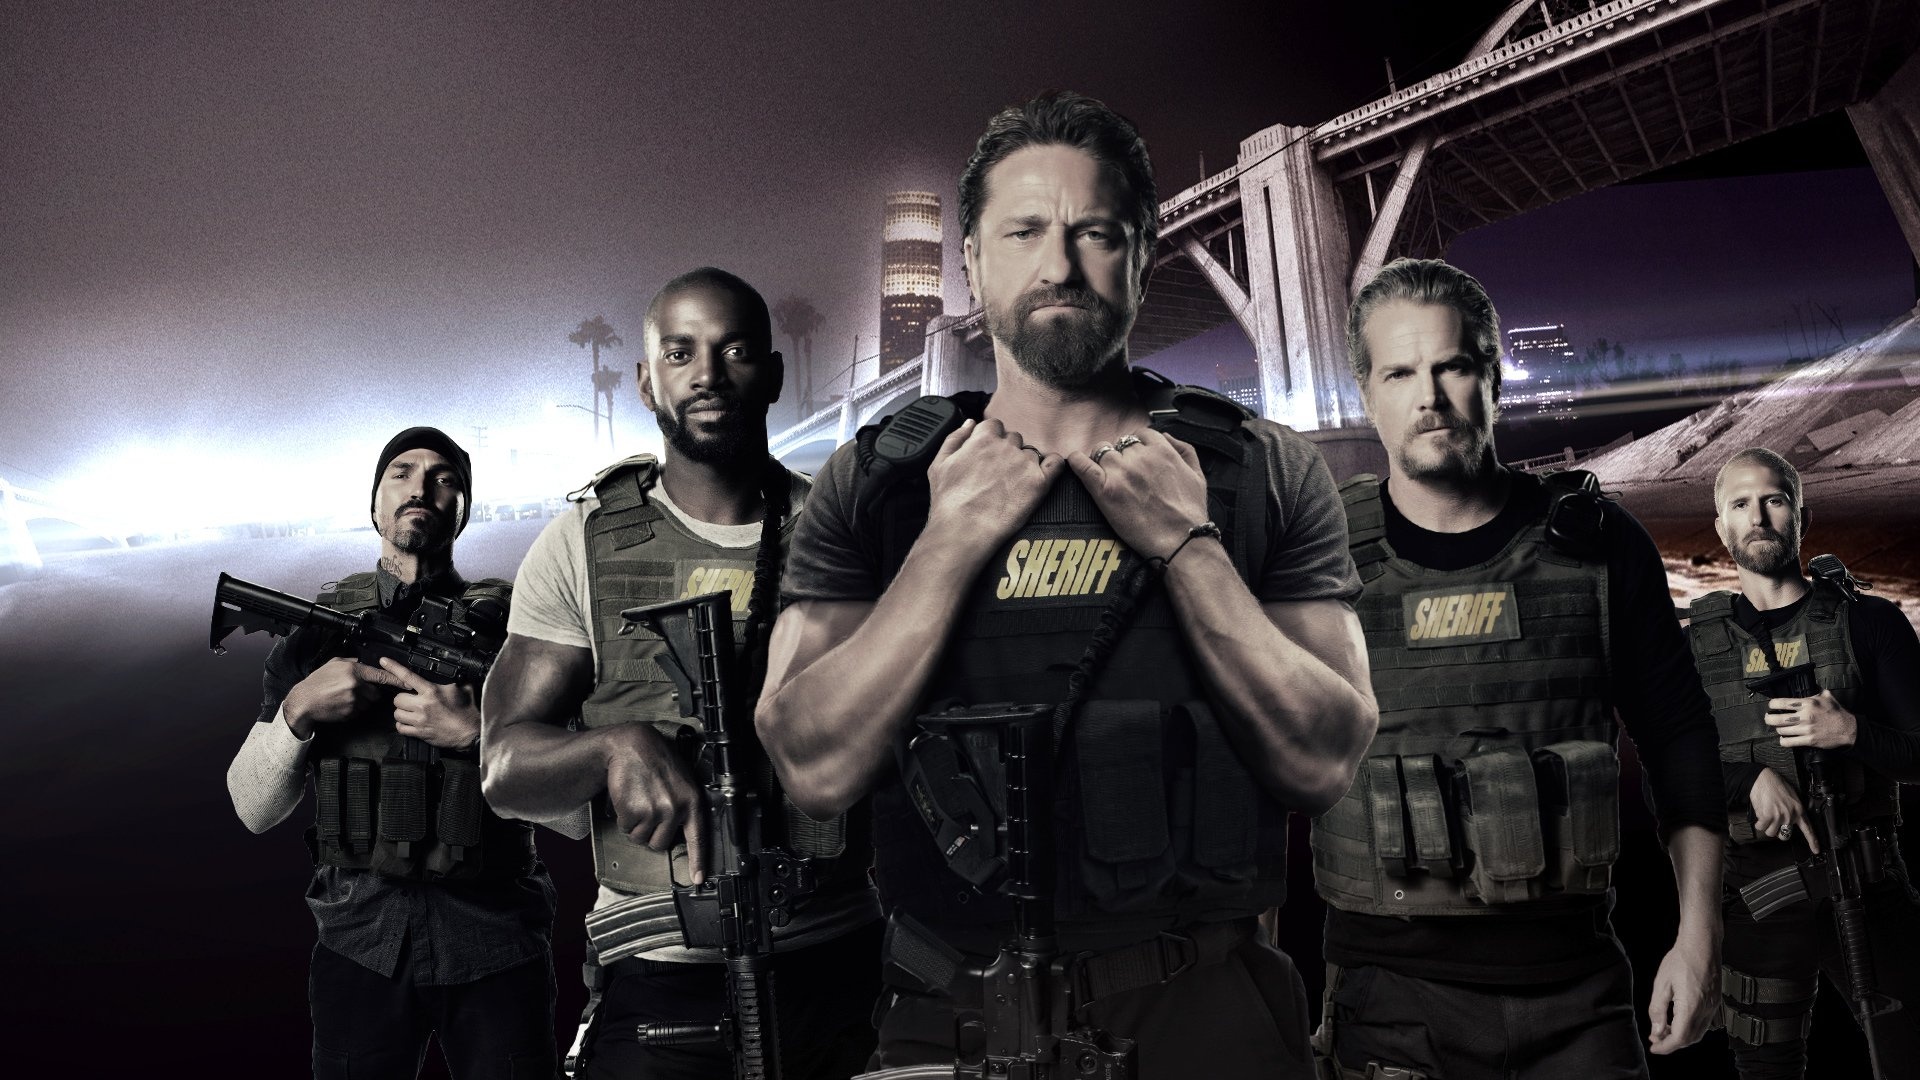 Den of Thieves, Rental option, Streaming availability, HD quality, 1920x1080 Full HD Desktop